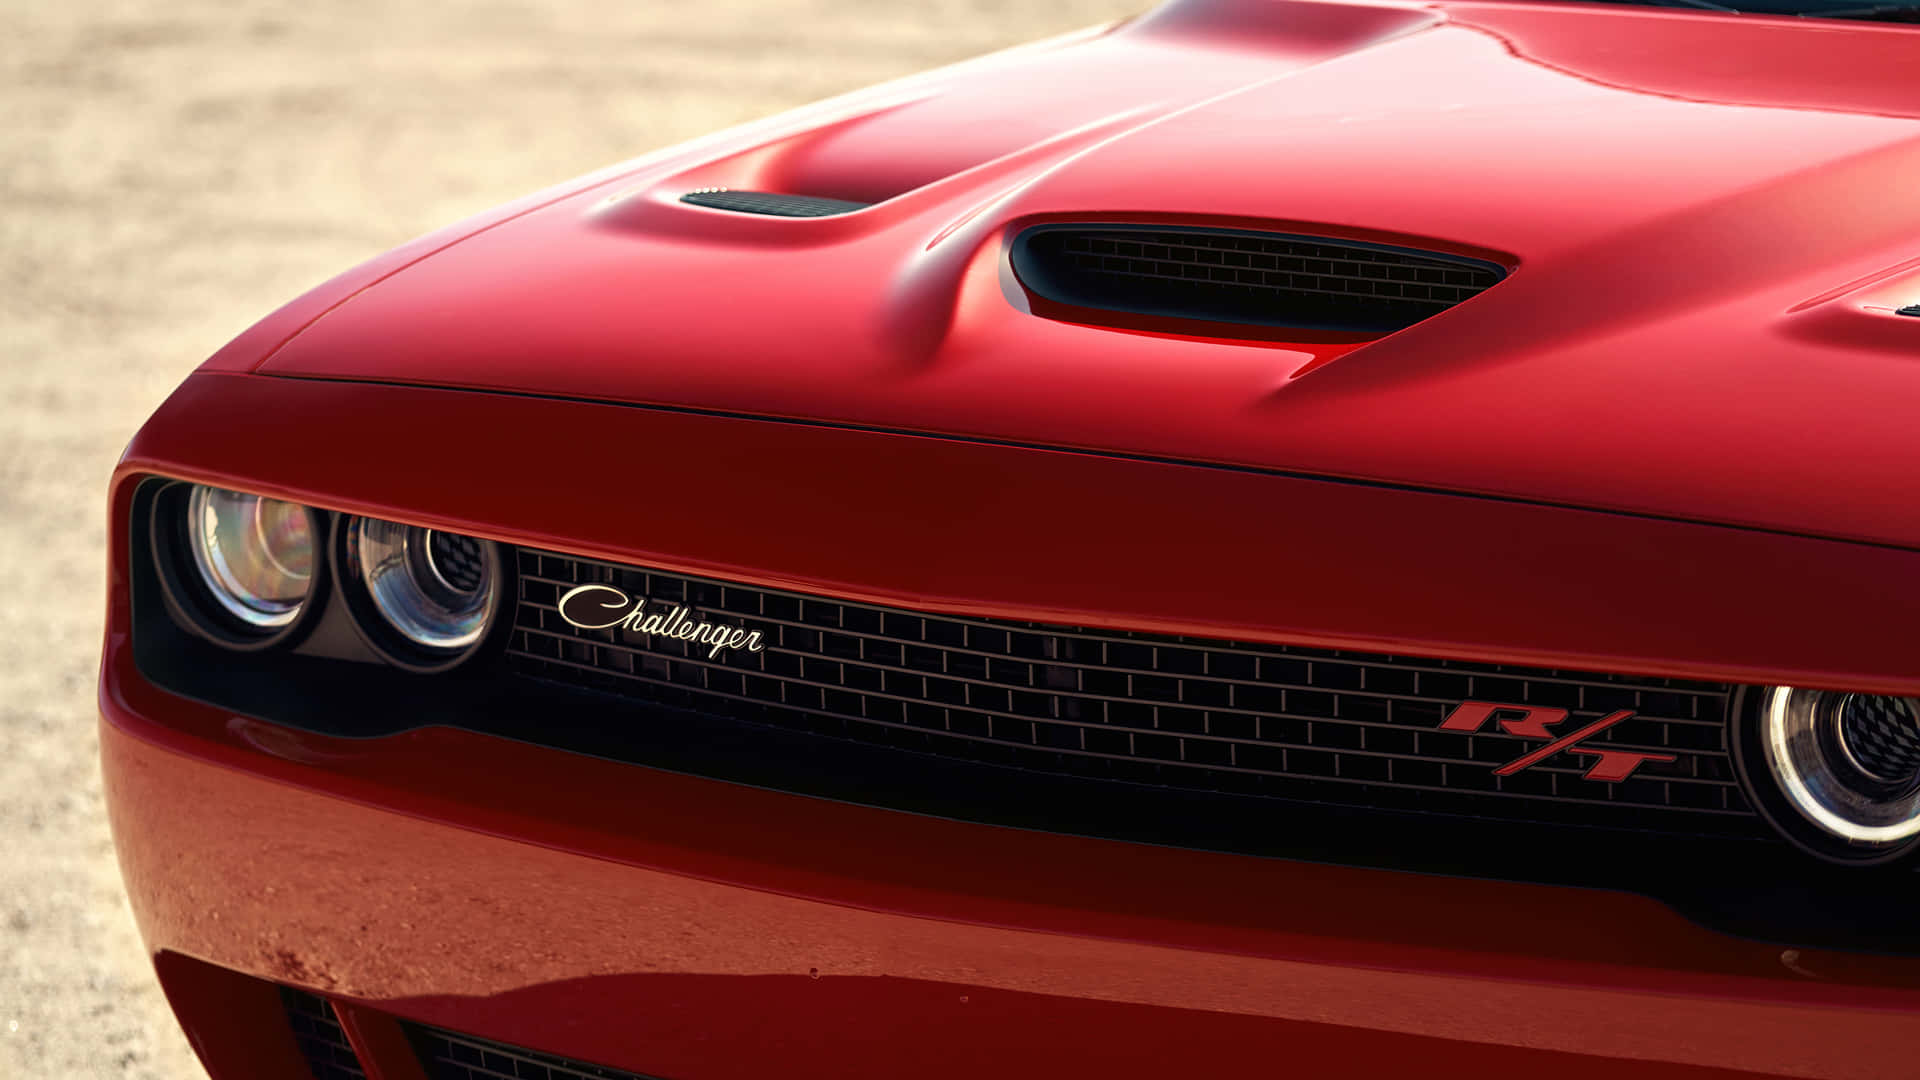 The Hood Of A Red Dodge Challenger Wallpaper